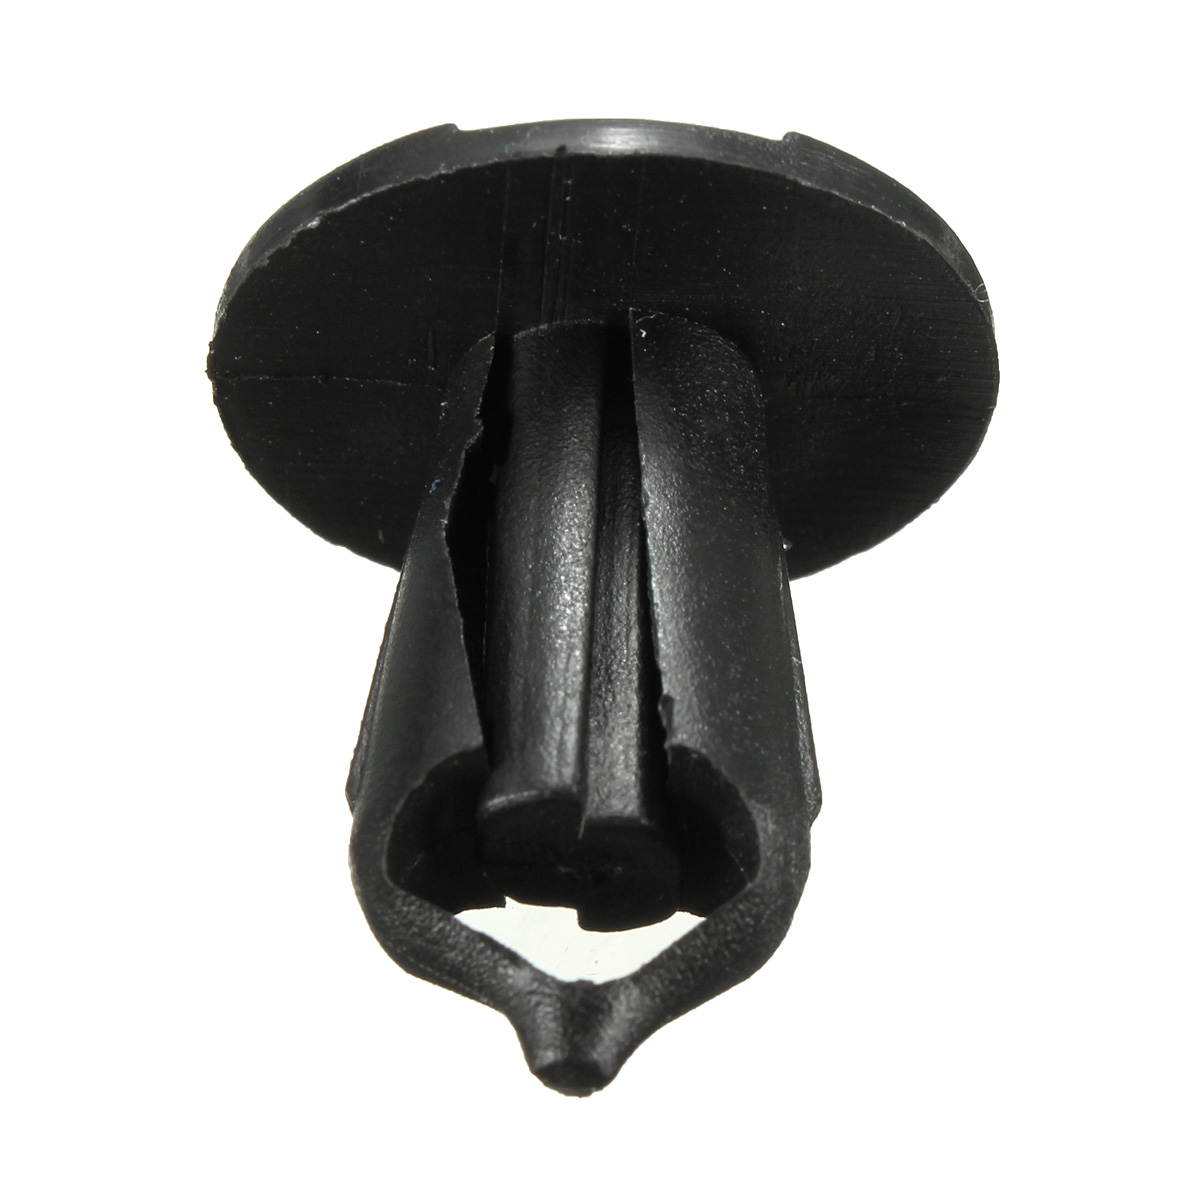 Wheel-Arch-Clips-Trim-Liner-Fastener-for-Land-Rover-Discovery-P38-ANR2224-1007359